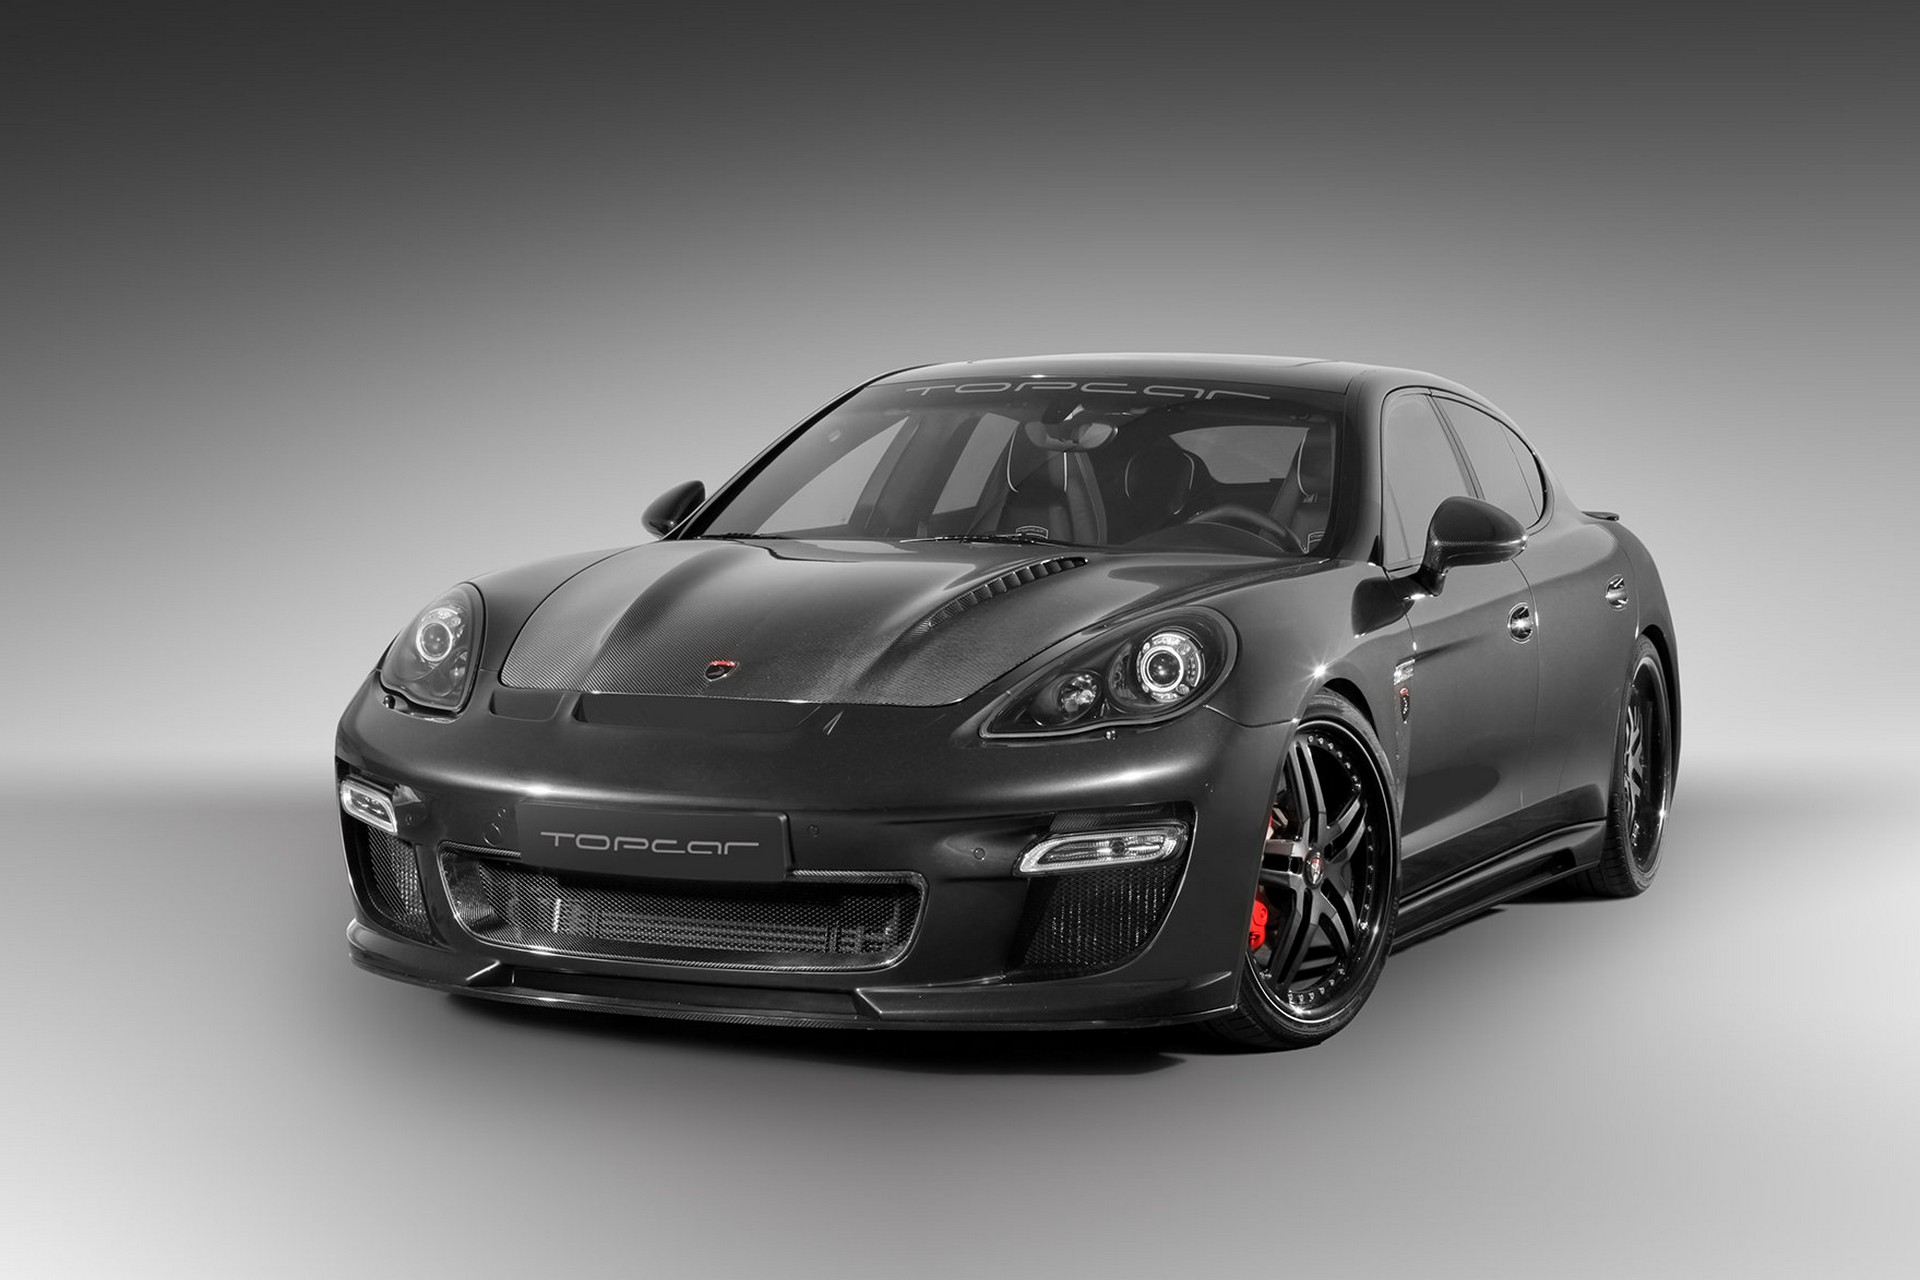 Topcar Design Body Kit For Porsche Panamera Gt Buy With Delivery Installation Affordable Price